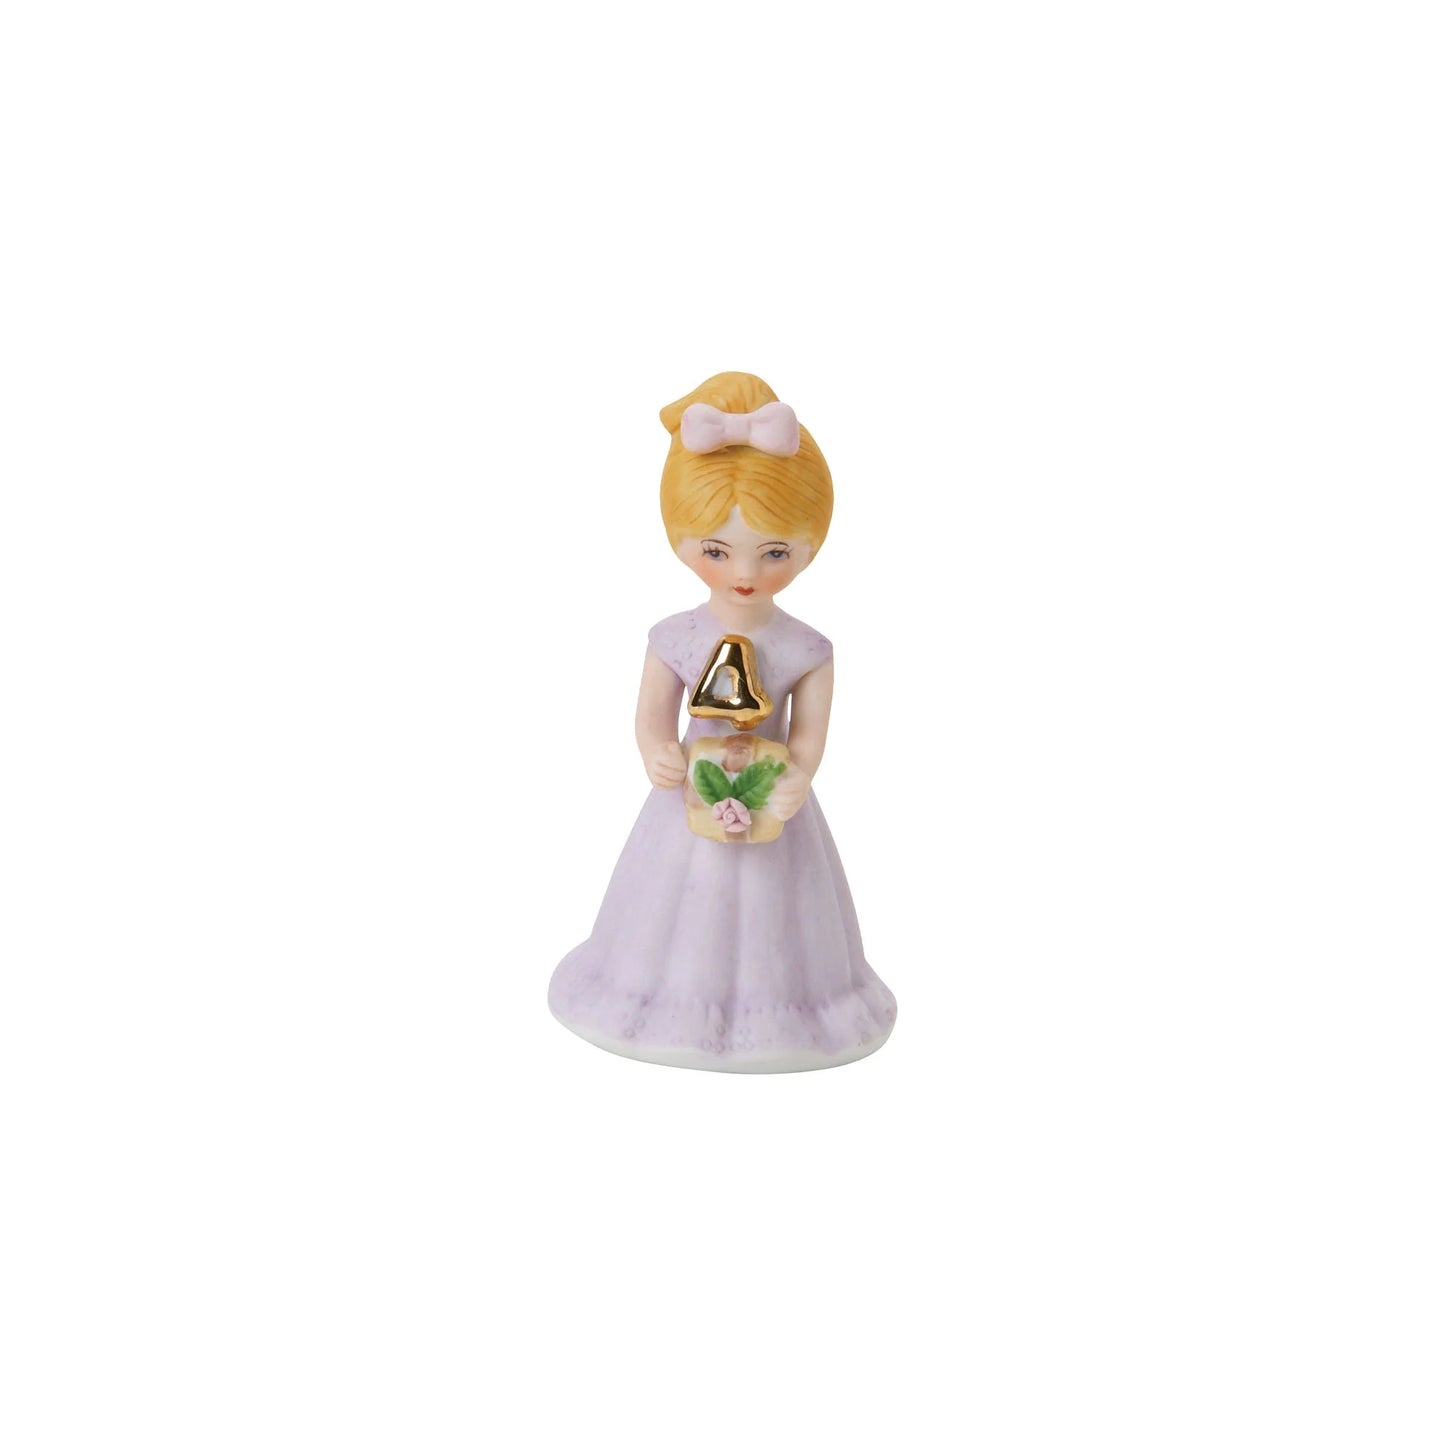 age 4 figurine front